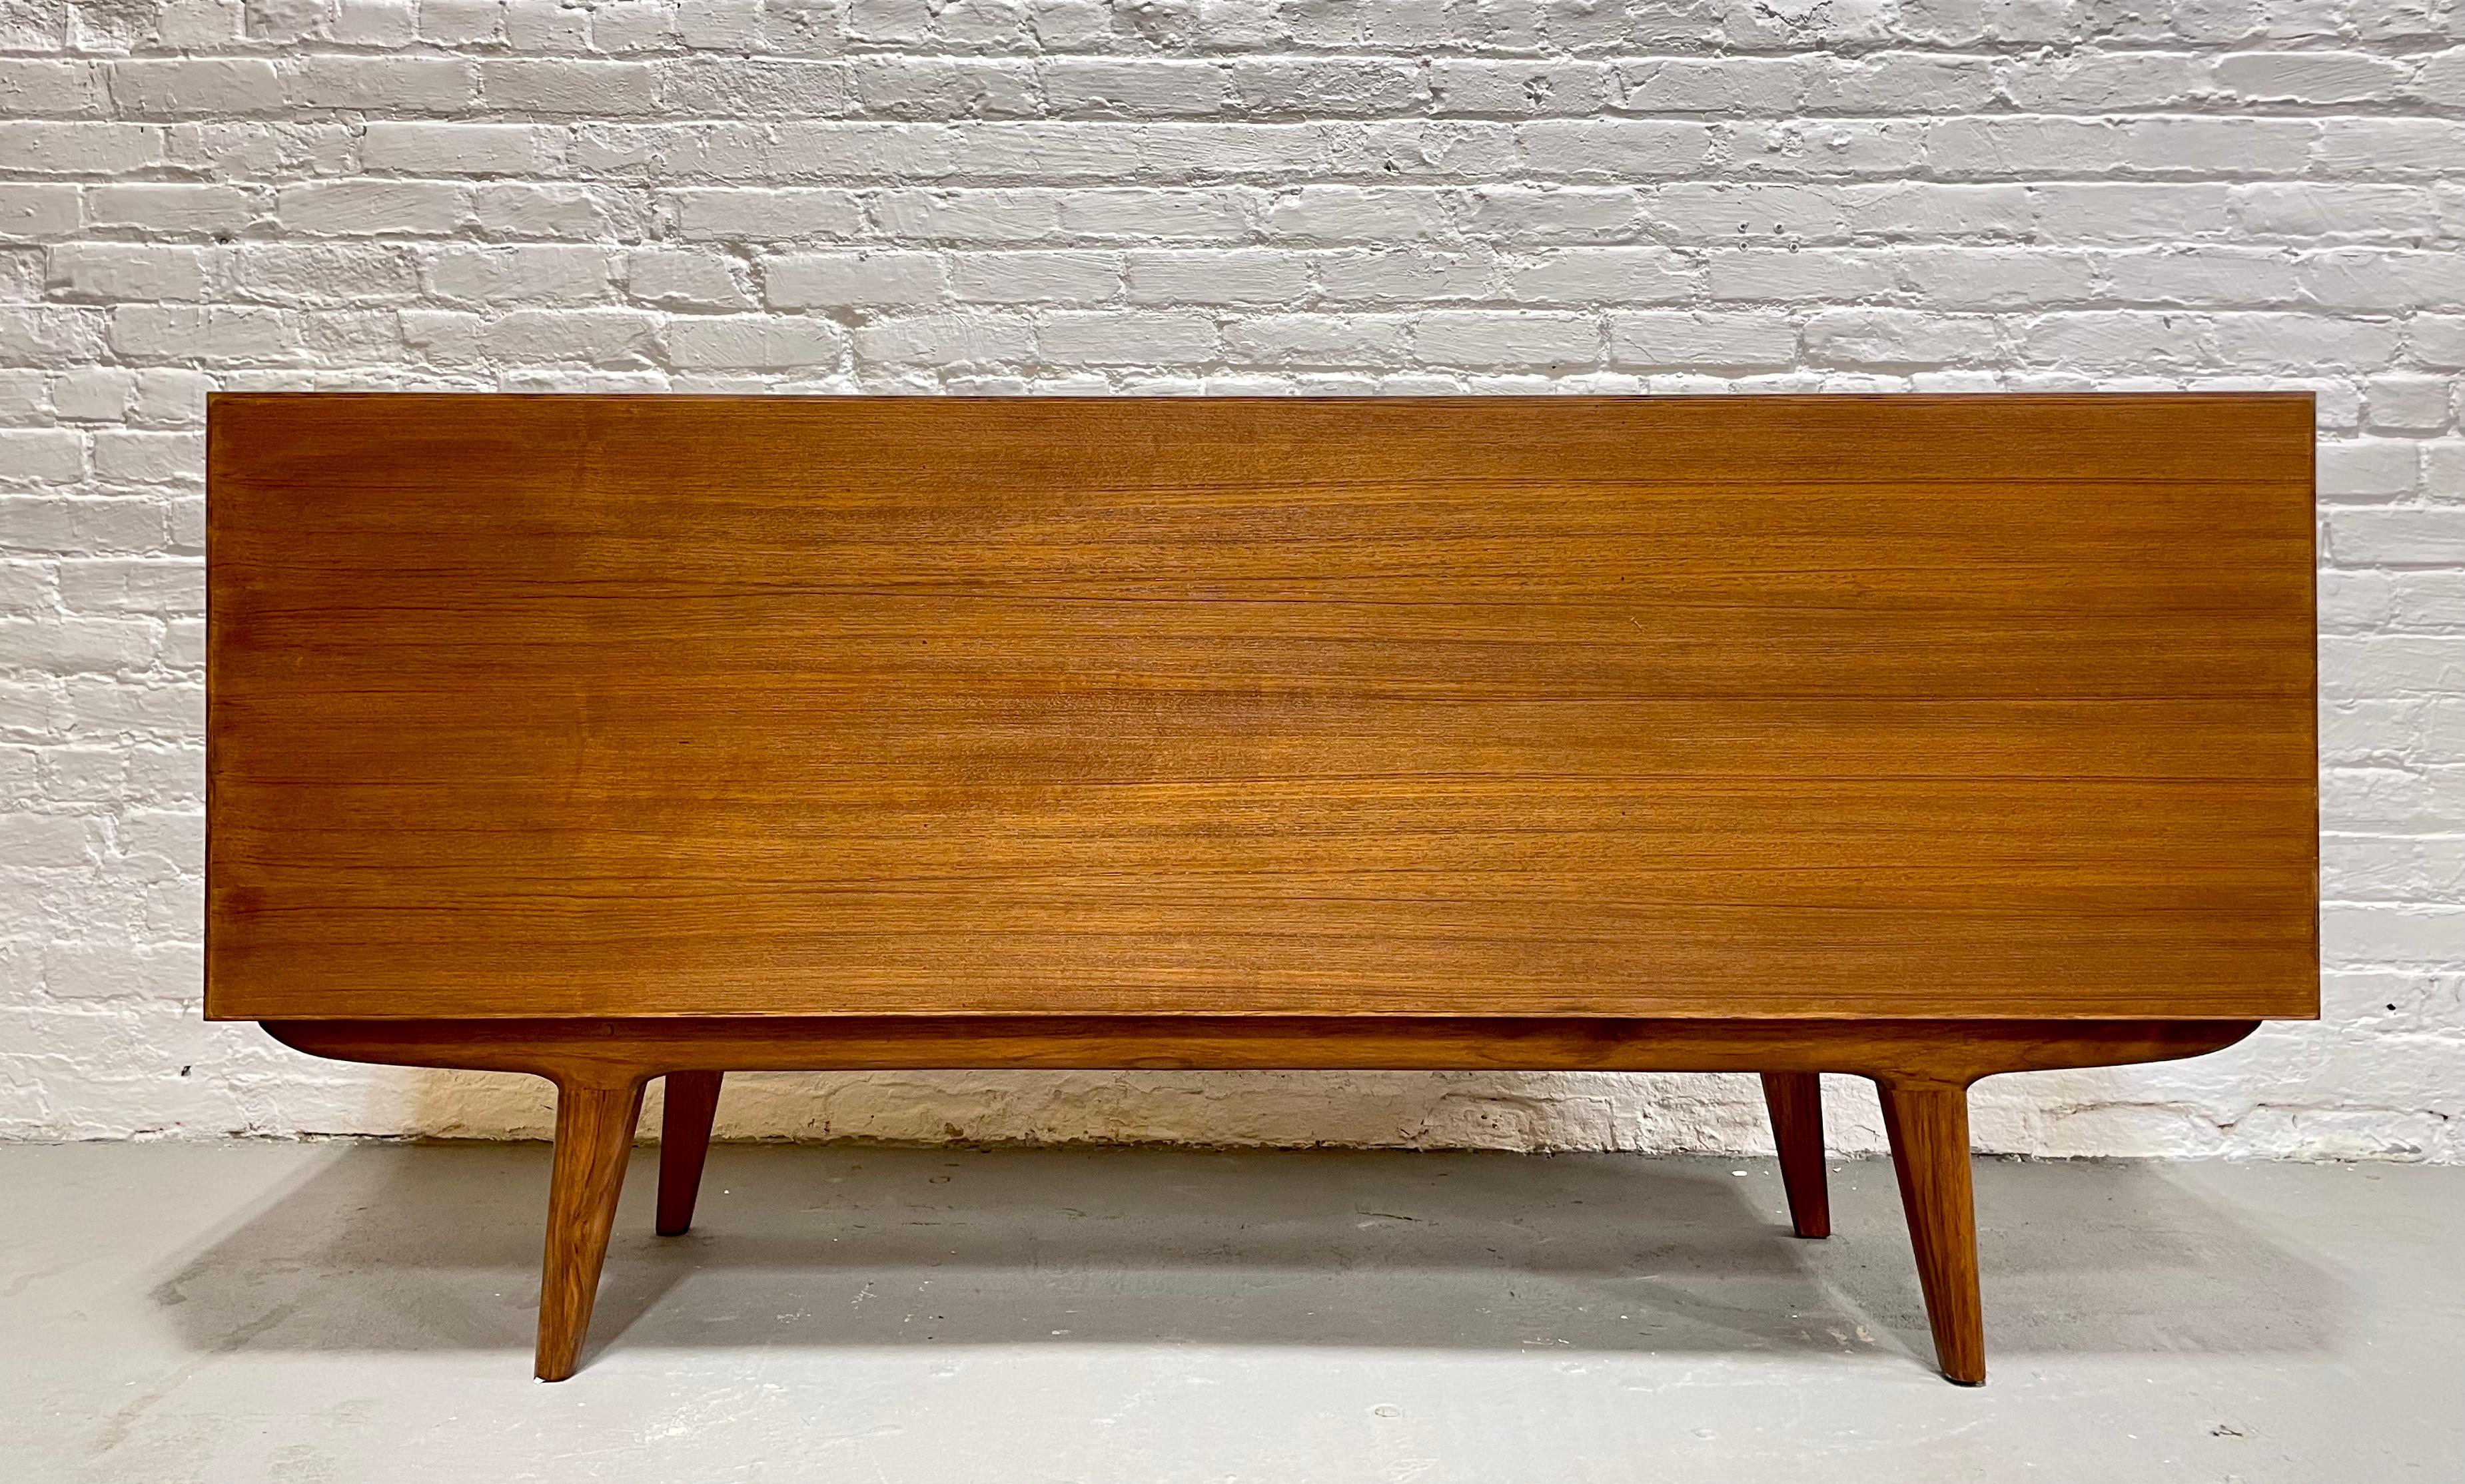  Handsome Mid Century MODERN styled SIDEBOARD / CREDENZA media stand 5